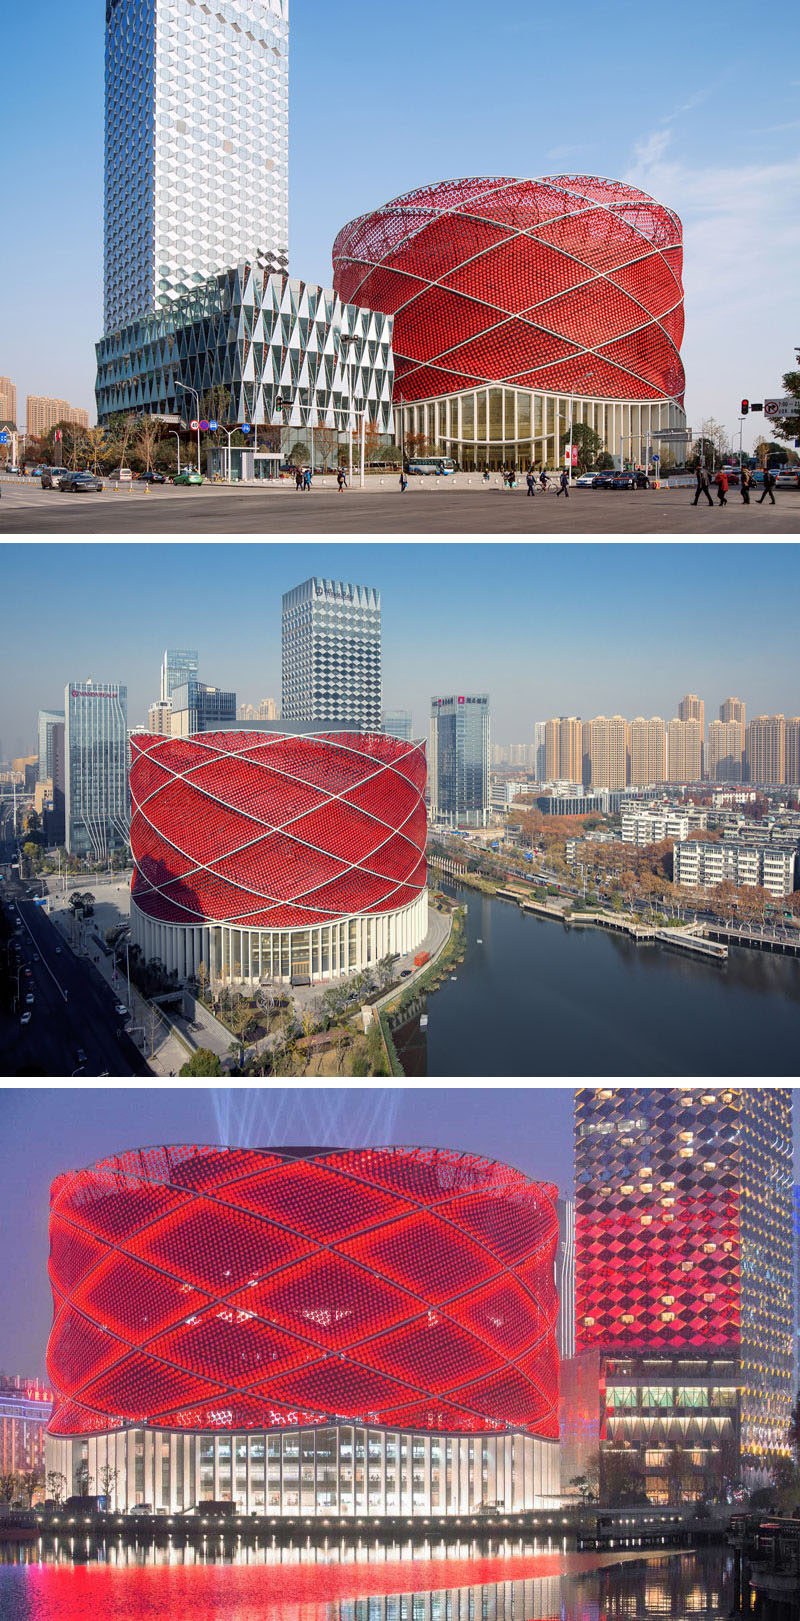 11 Red Houses And Buildings That Aren't Afraid To Make A Statement // Red concave aluminum disks are used to create the look of a red Chinese paper lantern on the exterior of this entertainment theatre.